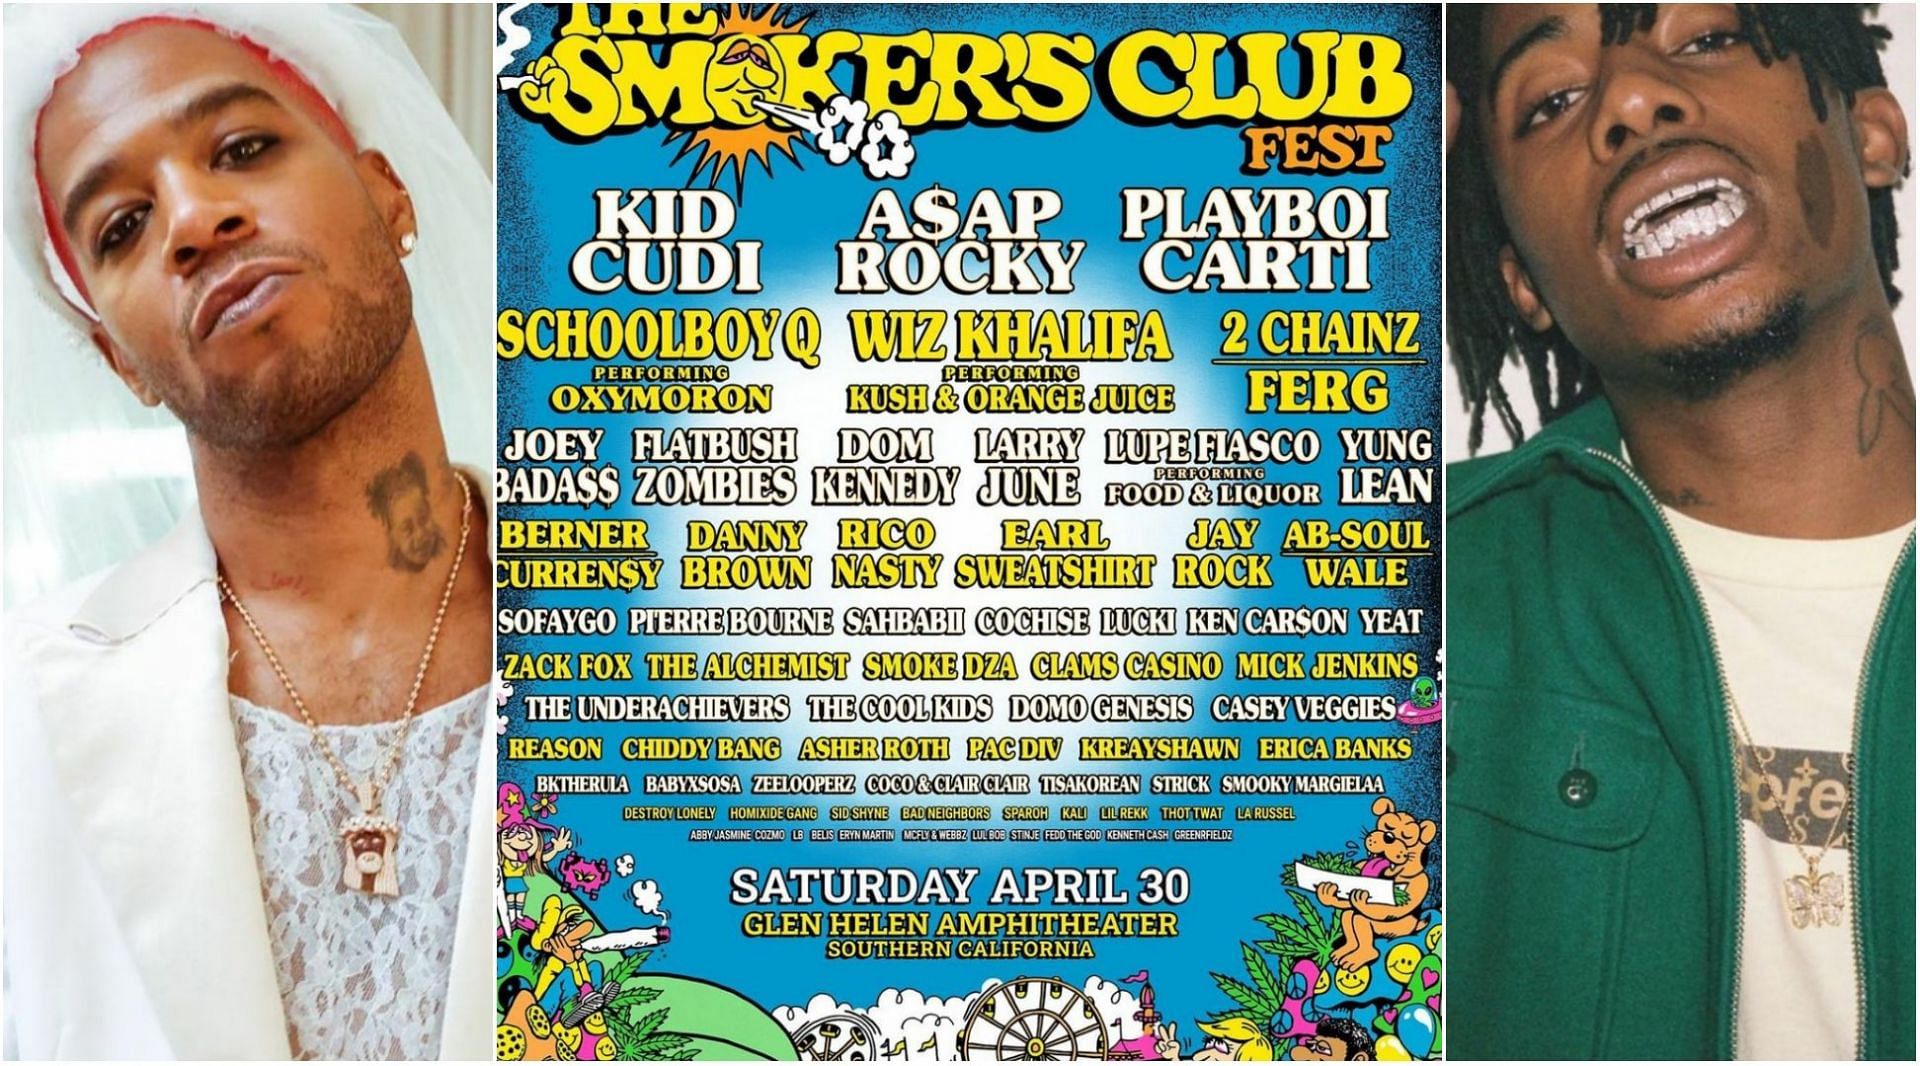 The 2022 edition of The Smoker&#039;s Club Fest is scheduled for April 30, 2022 (Images via Instagram @smokersfest, @kidcudi, @playboy_carti)